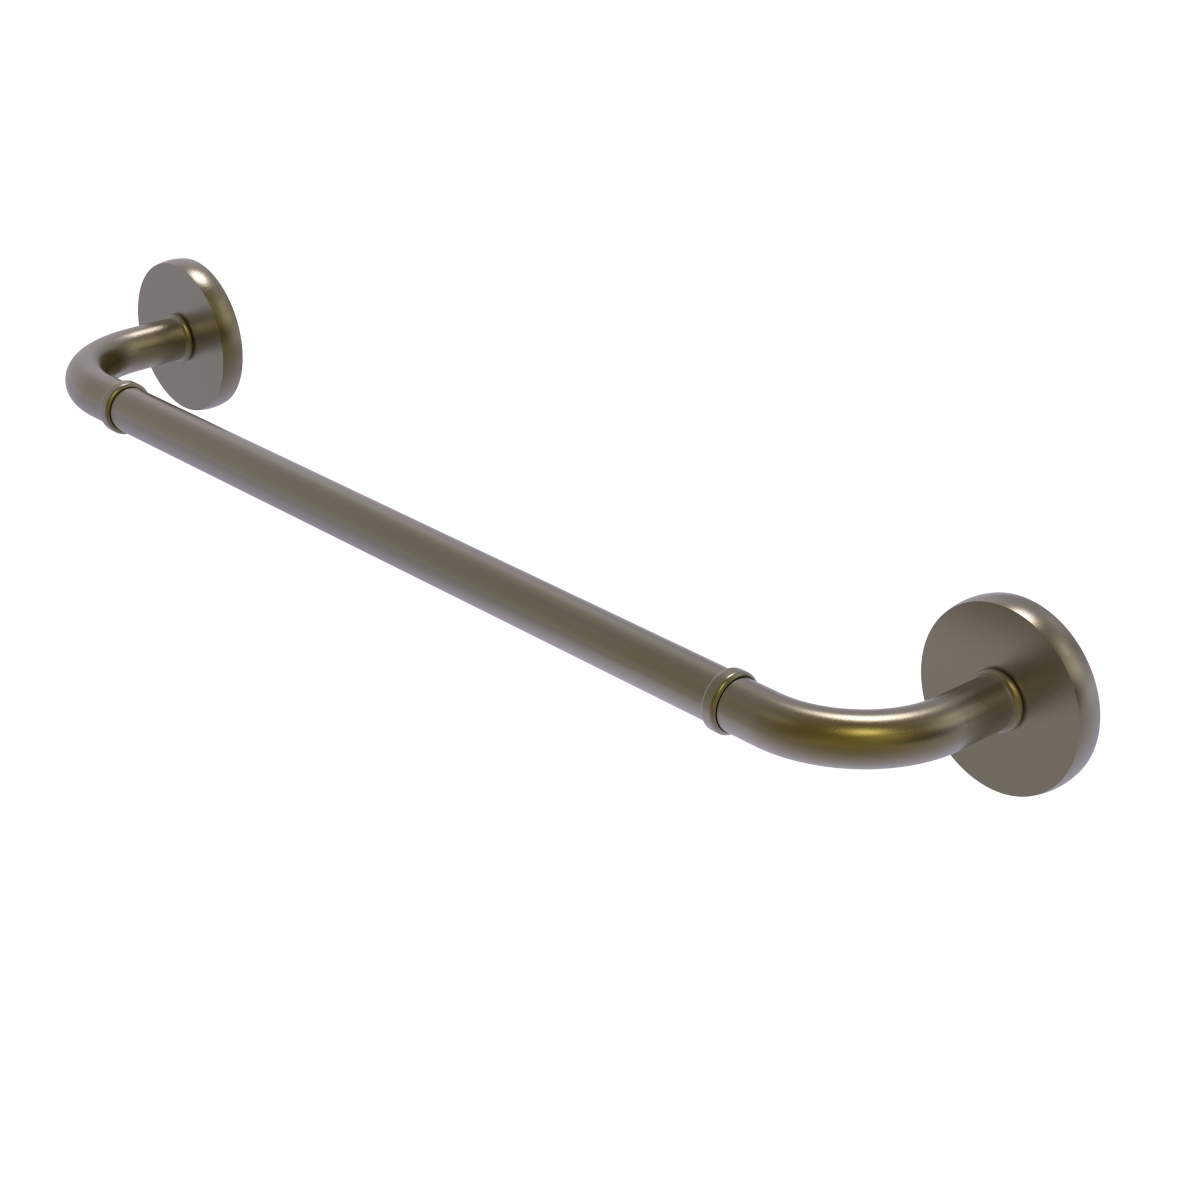 Allied Brass RM-41-24-ABR 24 in. Remi Collection Towel Bar, Antique Brass